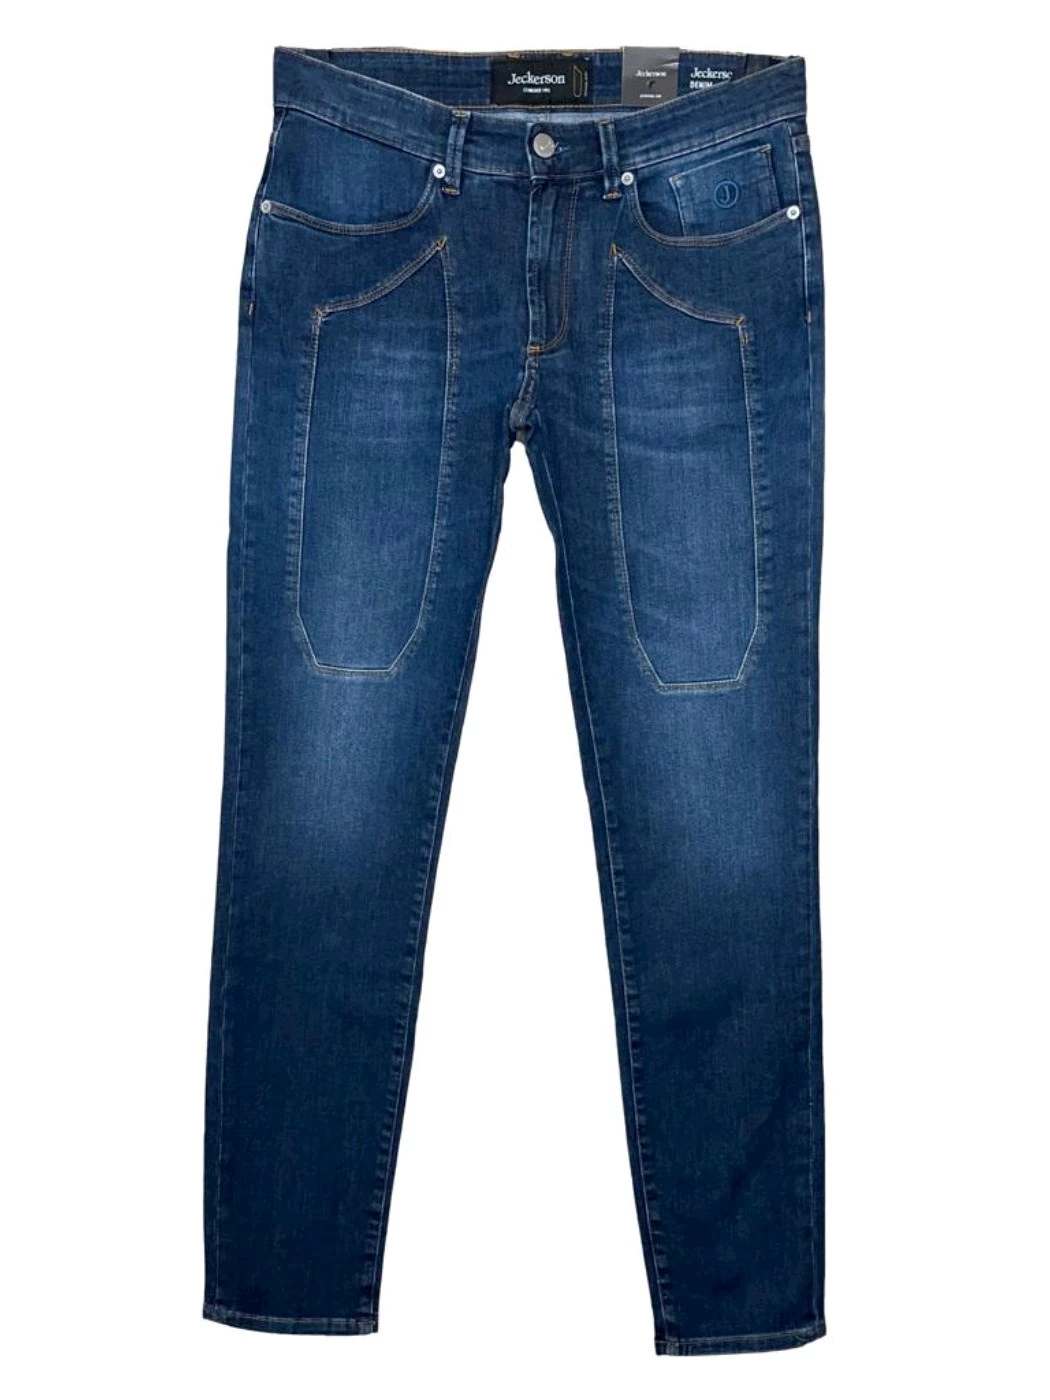 Jeans with Jeckerson patch